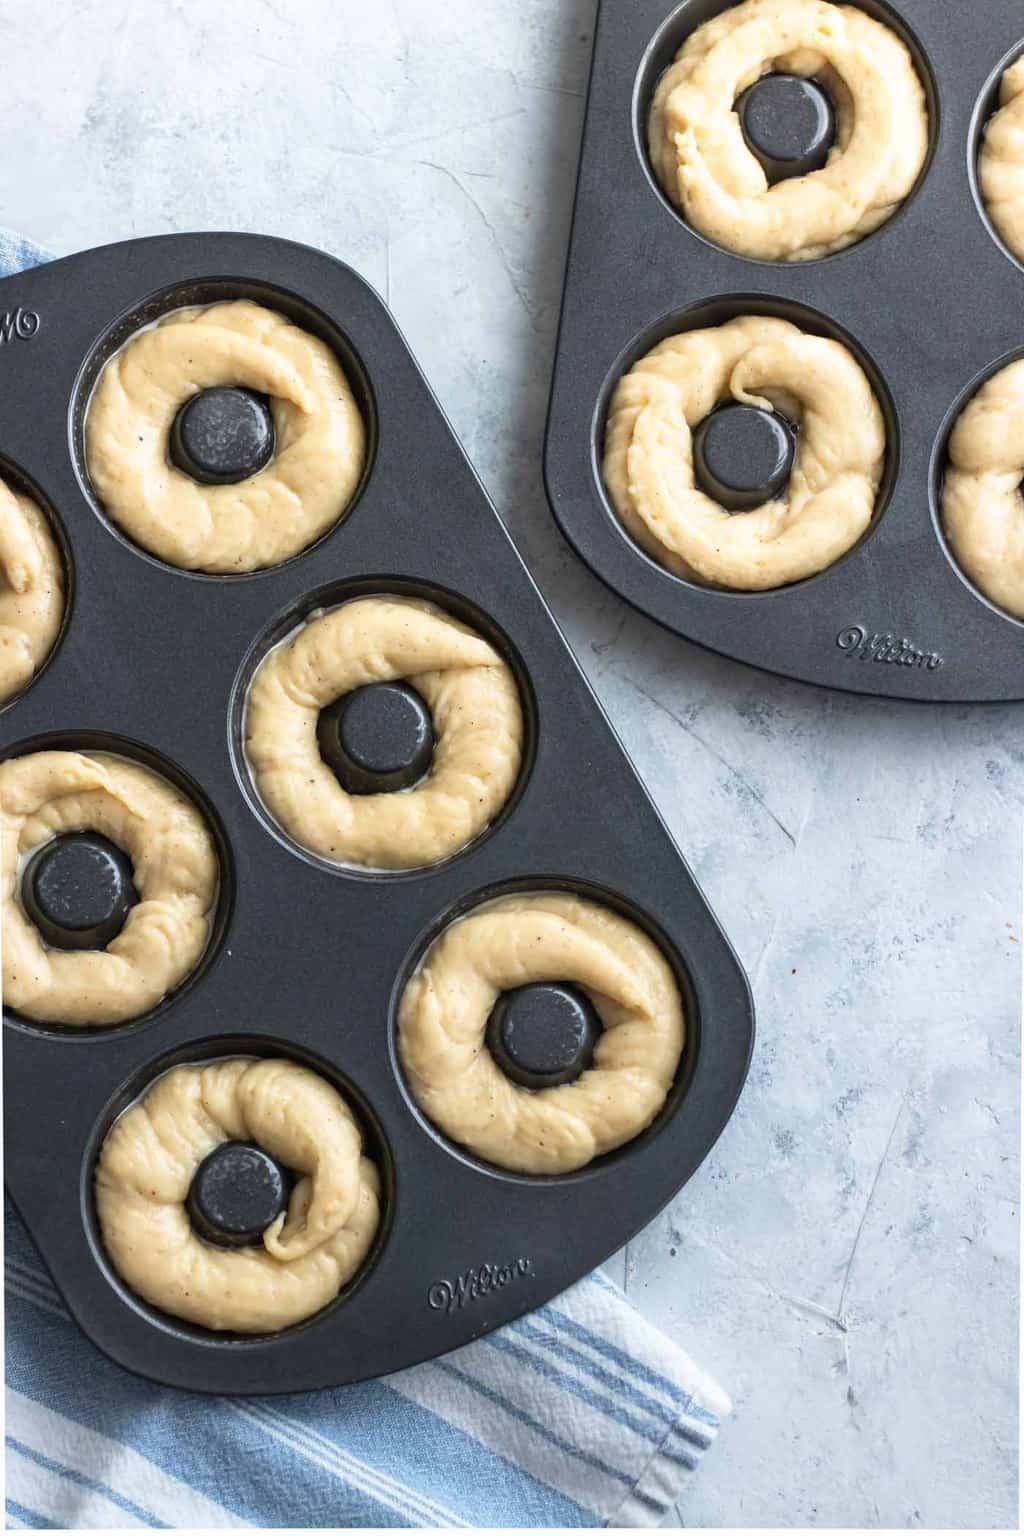 photo the gluten free donuts ready to be baked in their donut pans by top Houston lifestyle blogger Ashley Rose of Sugar & Cloth